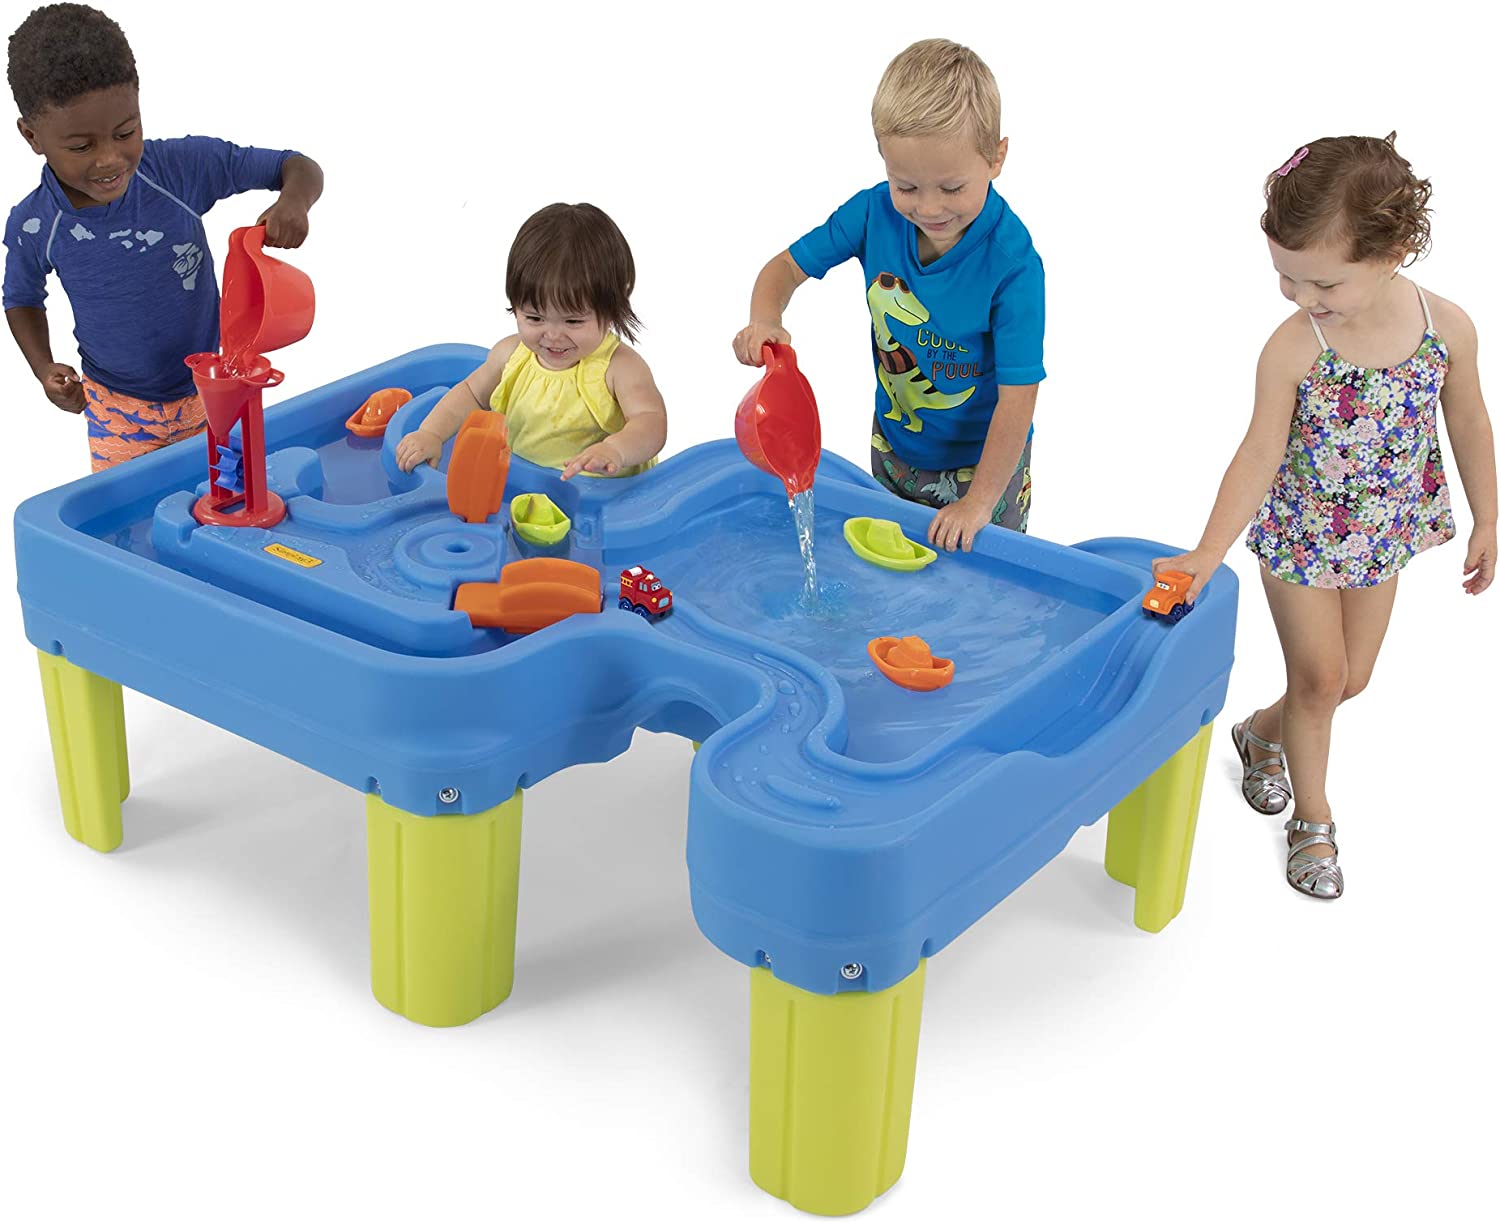 Simplay3 STEM Giant Water Table